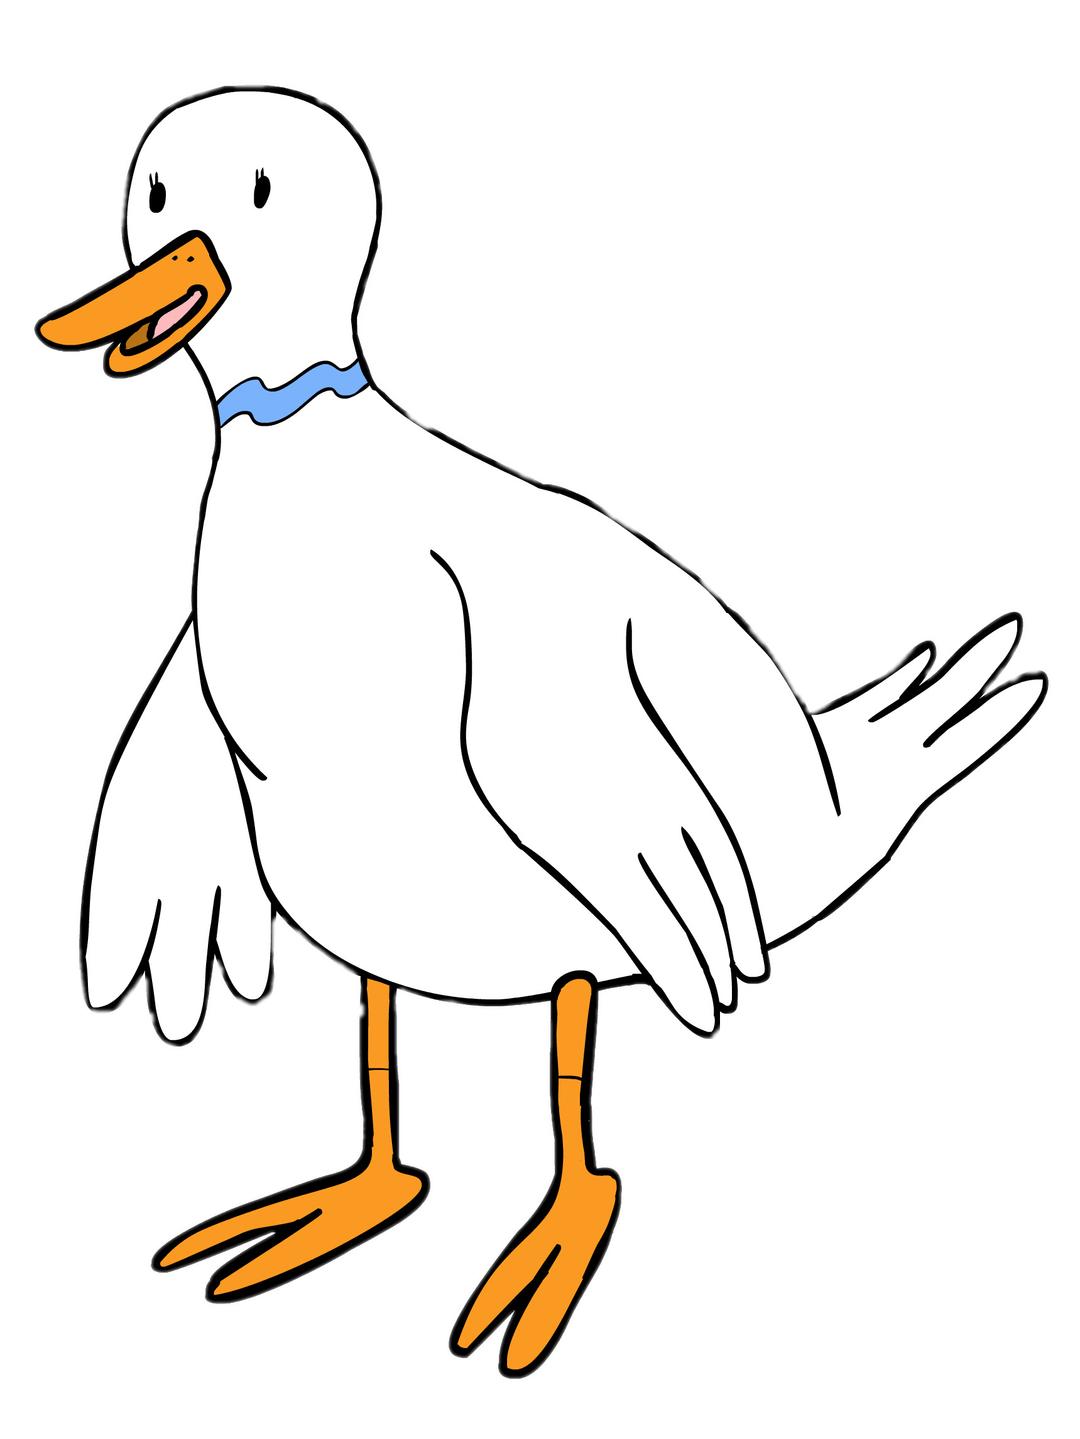 Adventure Time Boobafina the Duck png transparent